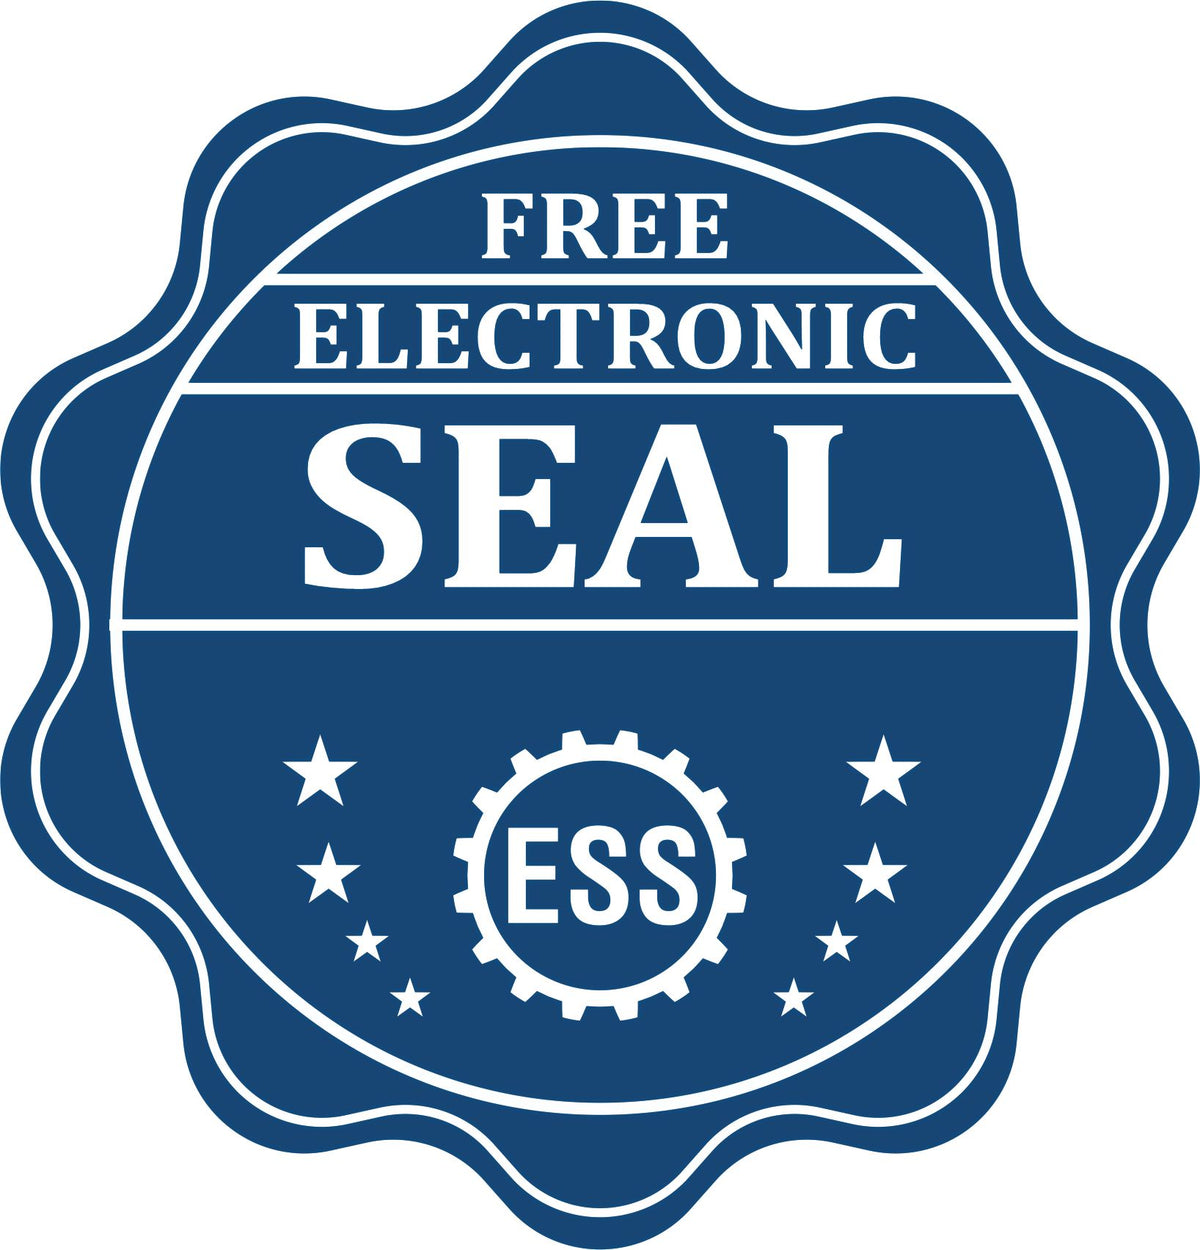 A badge showing a free electronic seal for the Slim Pre-Inked California Professional Engineer Seal Stamp with stars and the ESS gear on the emblem.